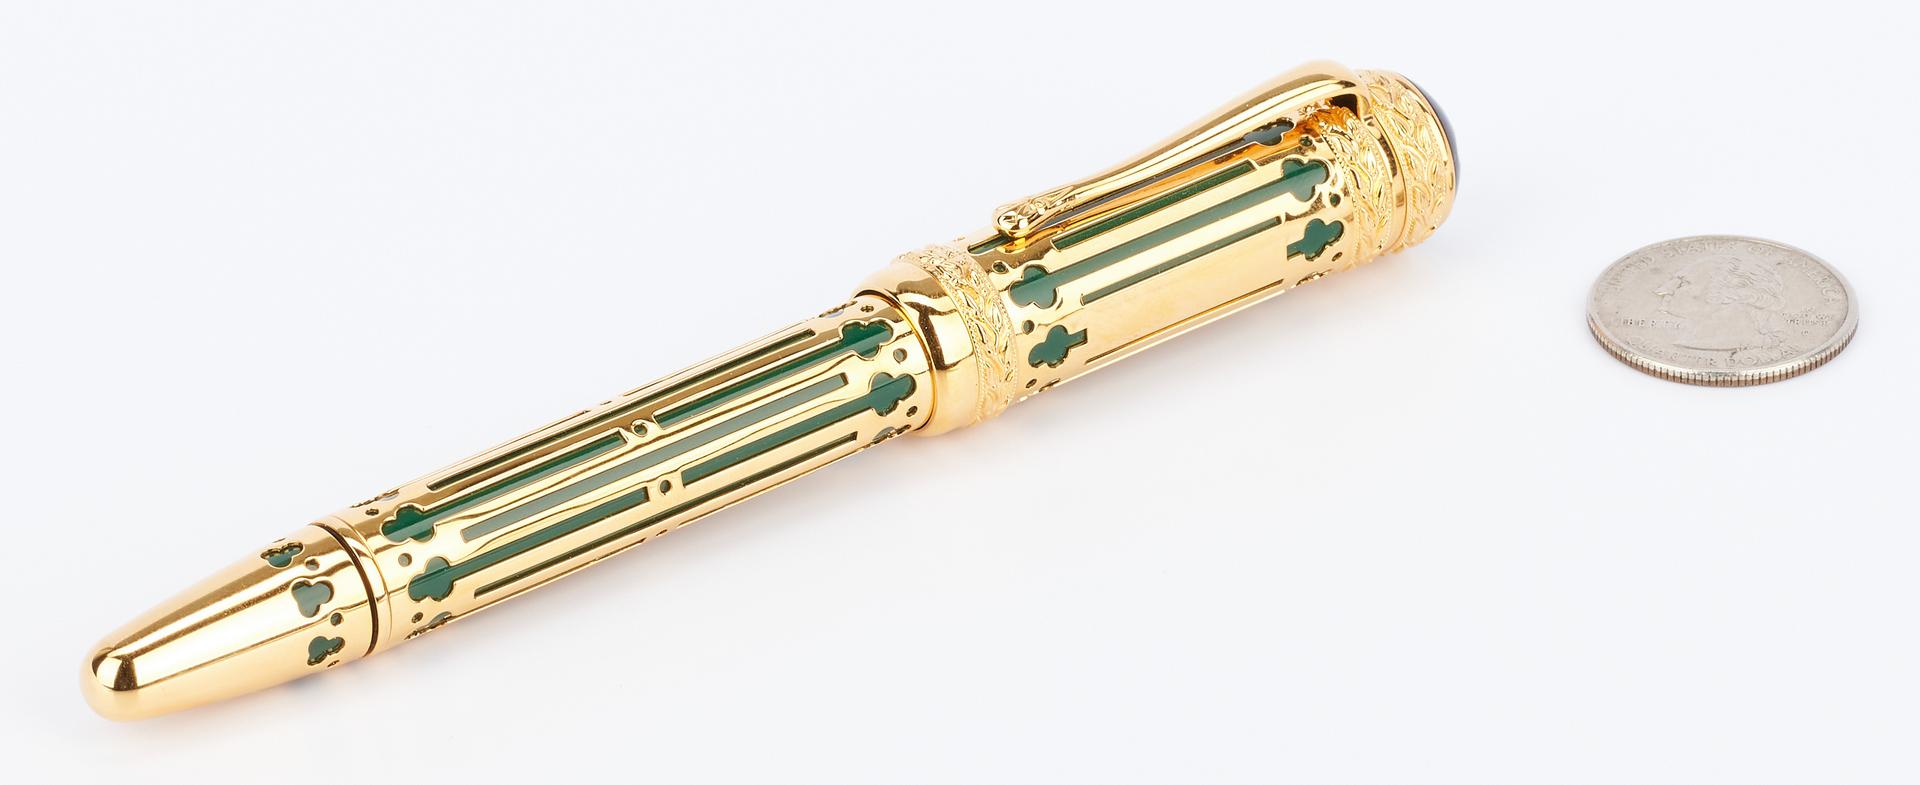 Montblanc Peter the Great 4810 Fountain Pen - Image 2 of 10